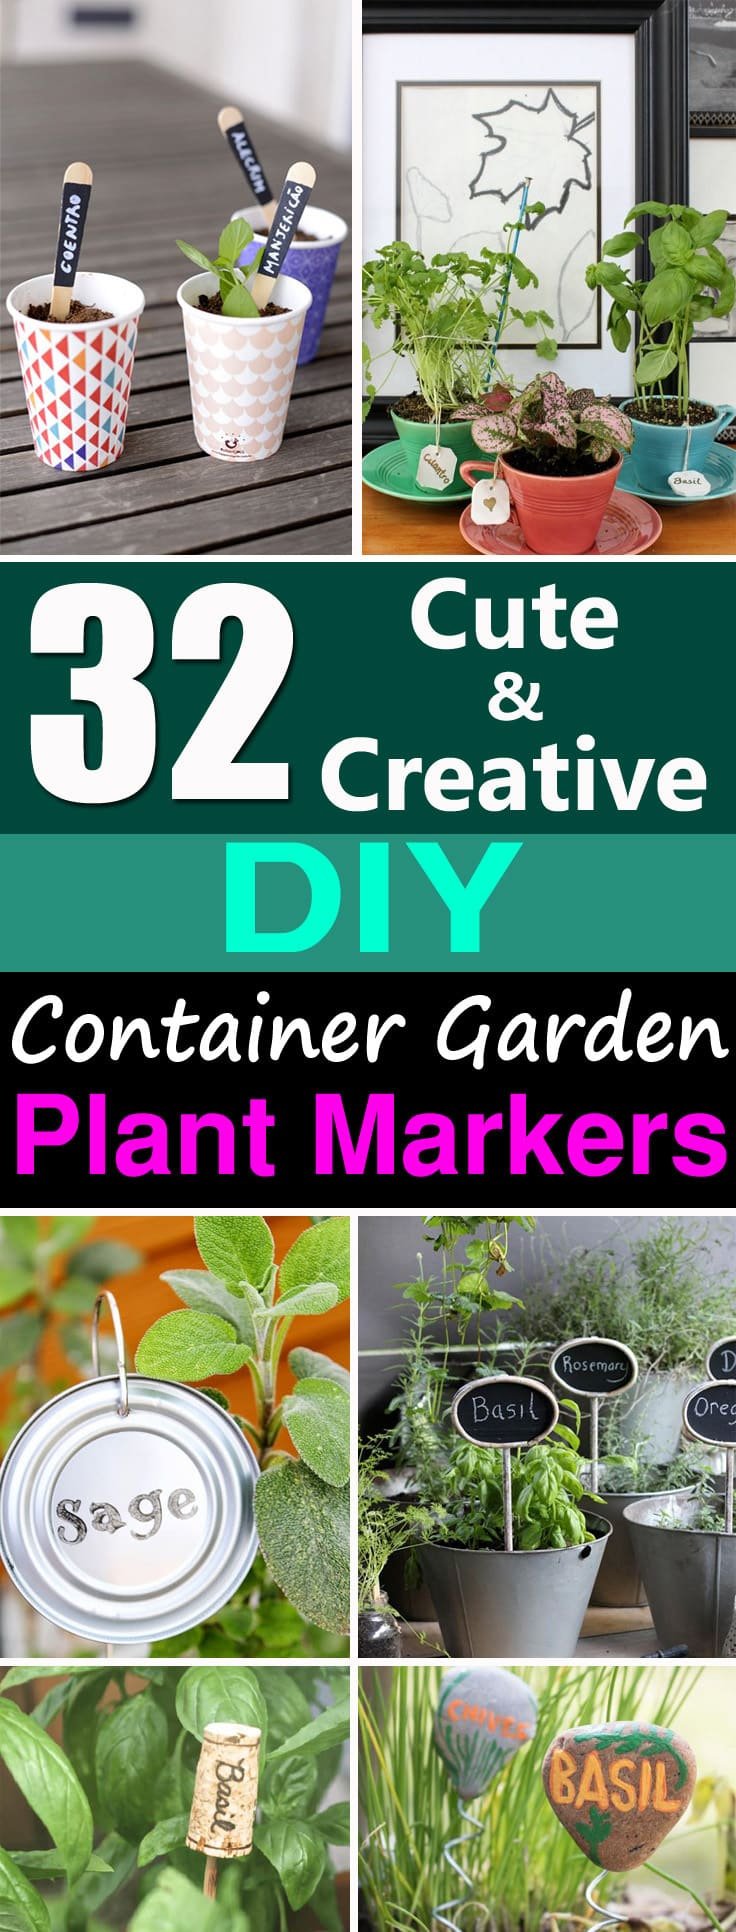 Learn how to create Garden Markers for your container garden, choose from this extensive list of 32 DIY Plant Marker Ideas!